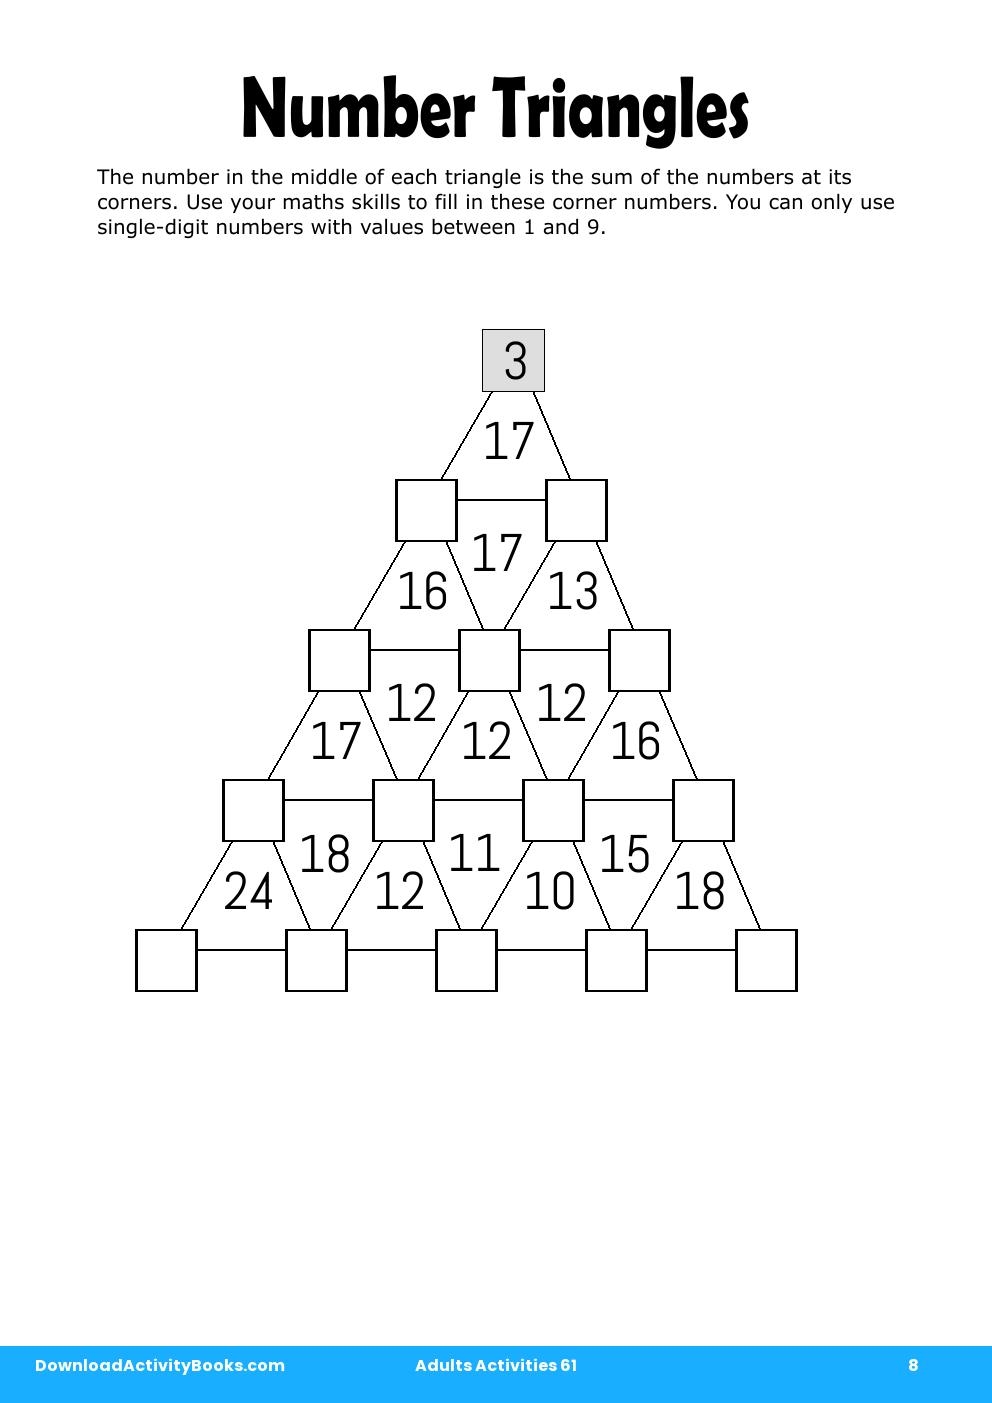 Number Triangles in Adults Activities 61